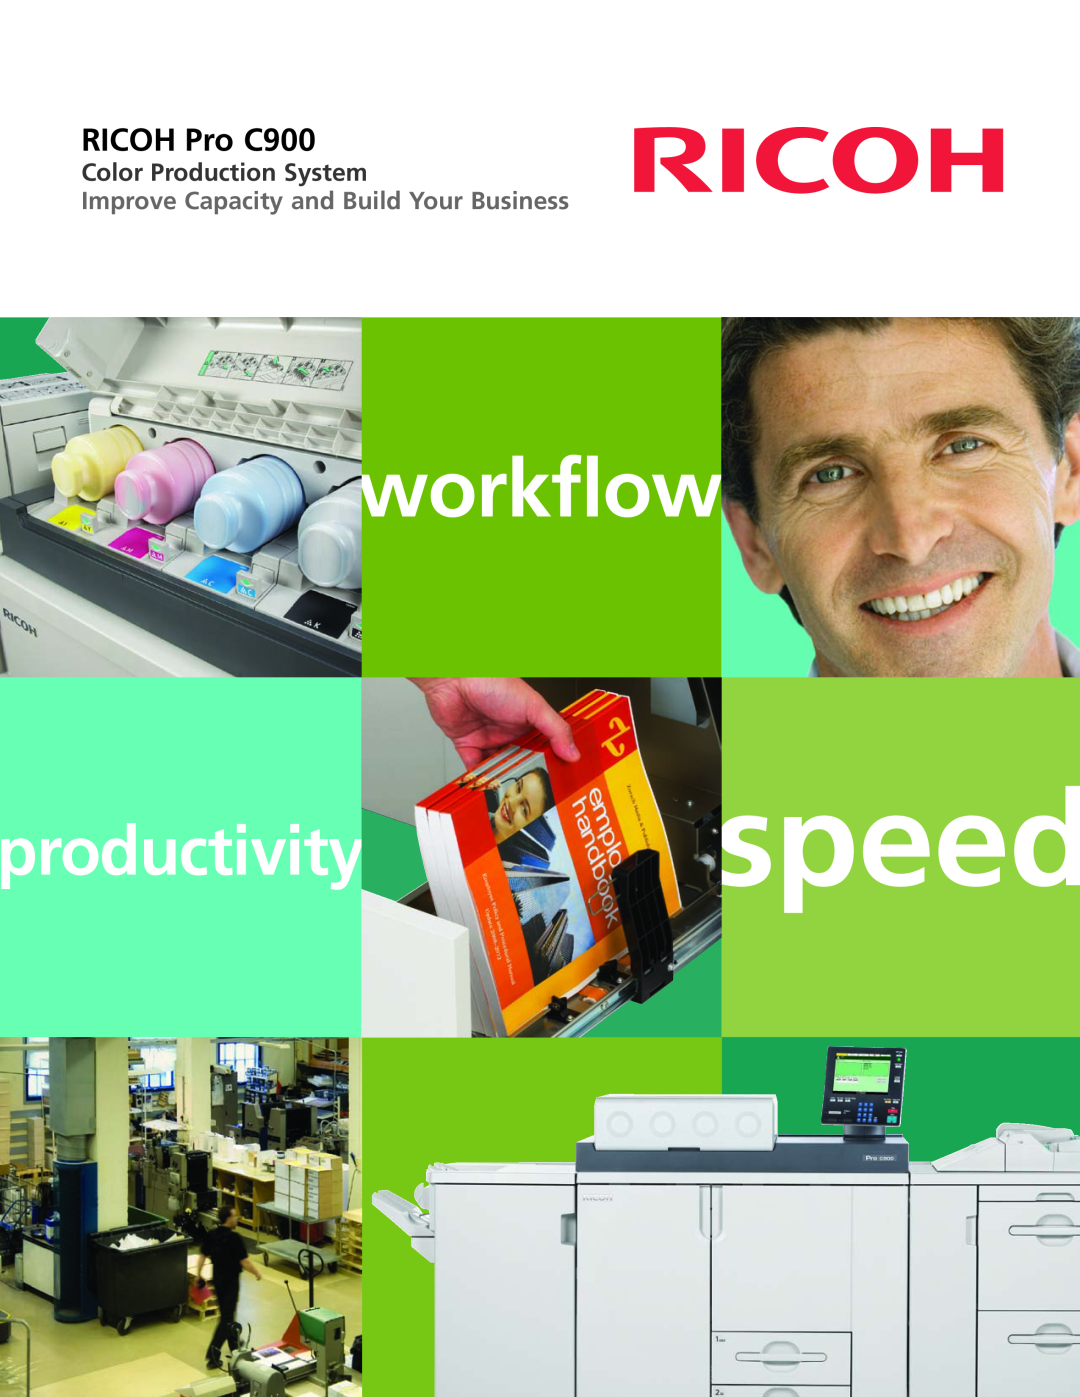 Ricoh manual workflow, productivity speed, RICOH Pro C900, Color Production System 